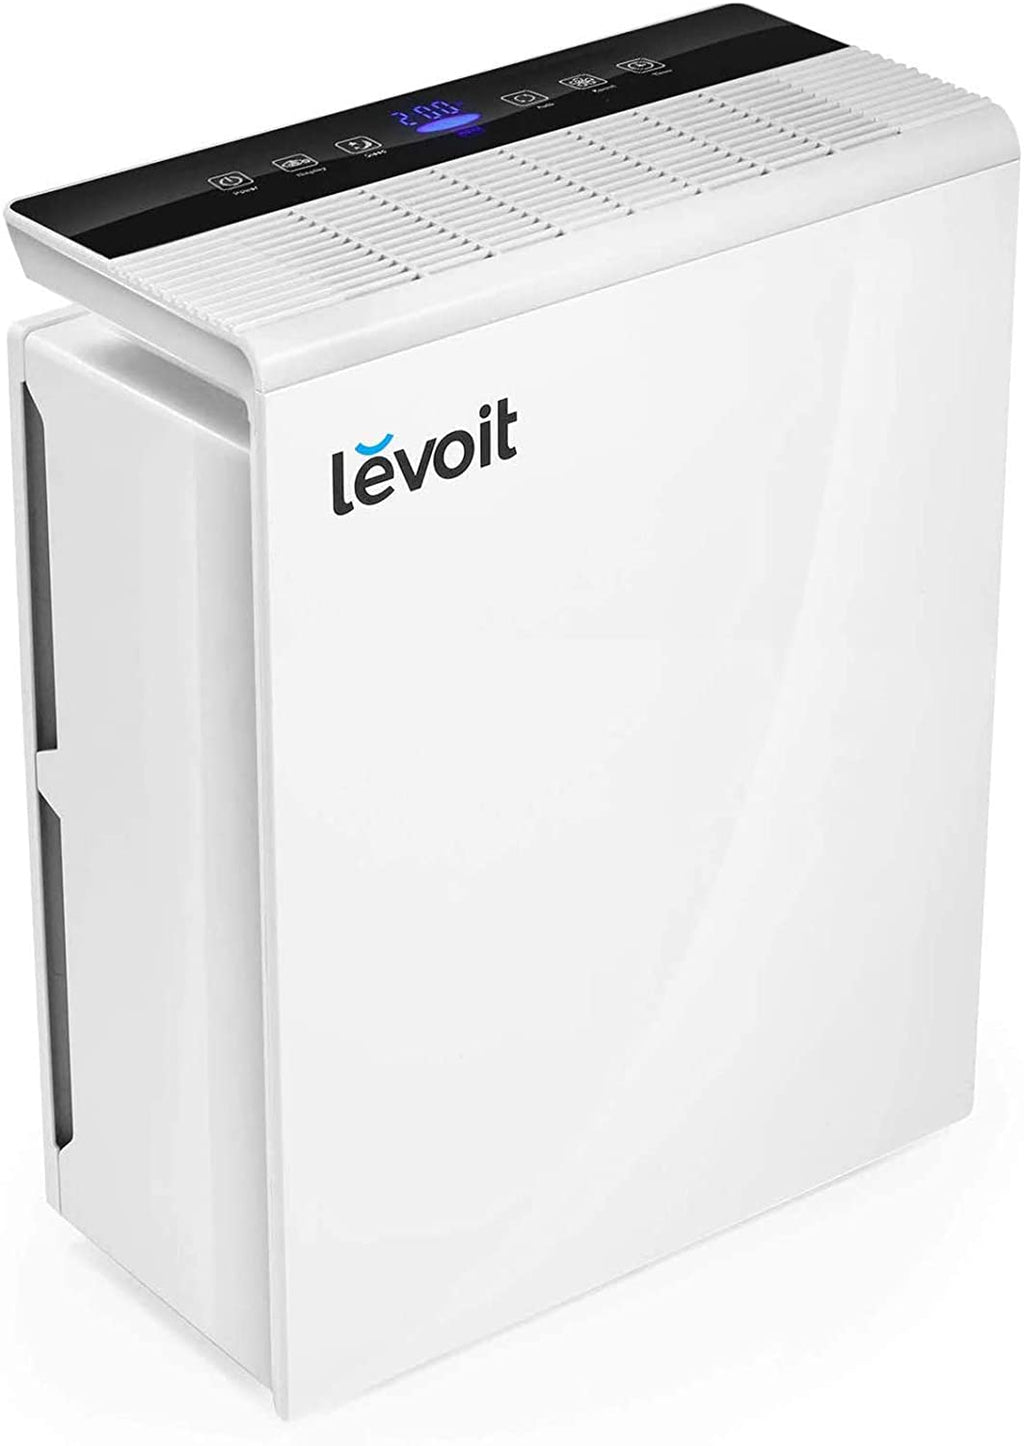 LEVOIT Air Purifier with Natural Charcoal, Medical-Grade True HEPA Filter